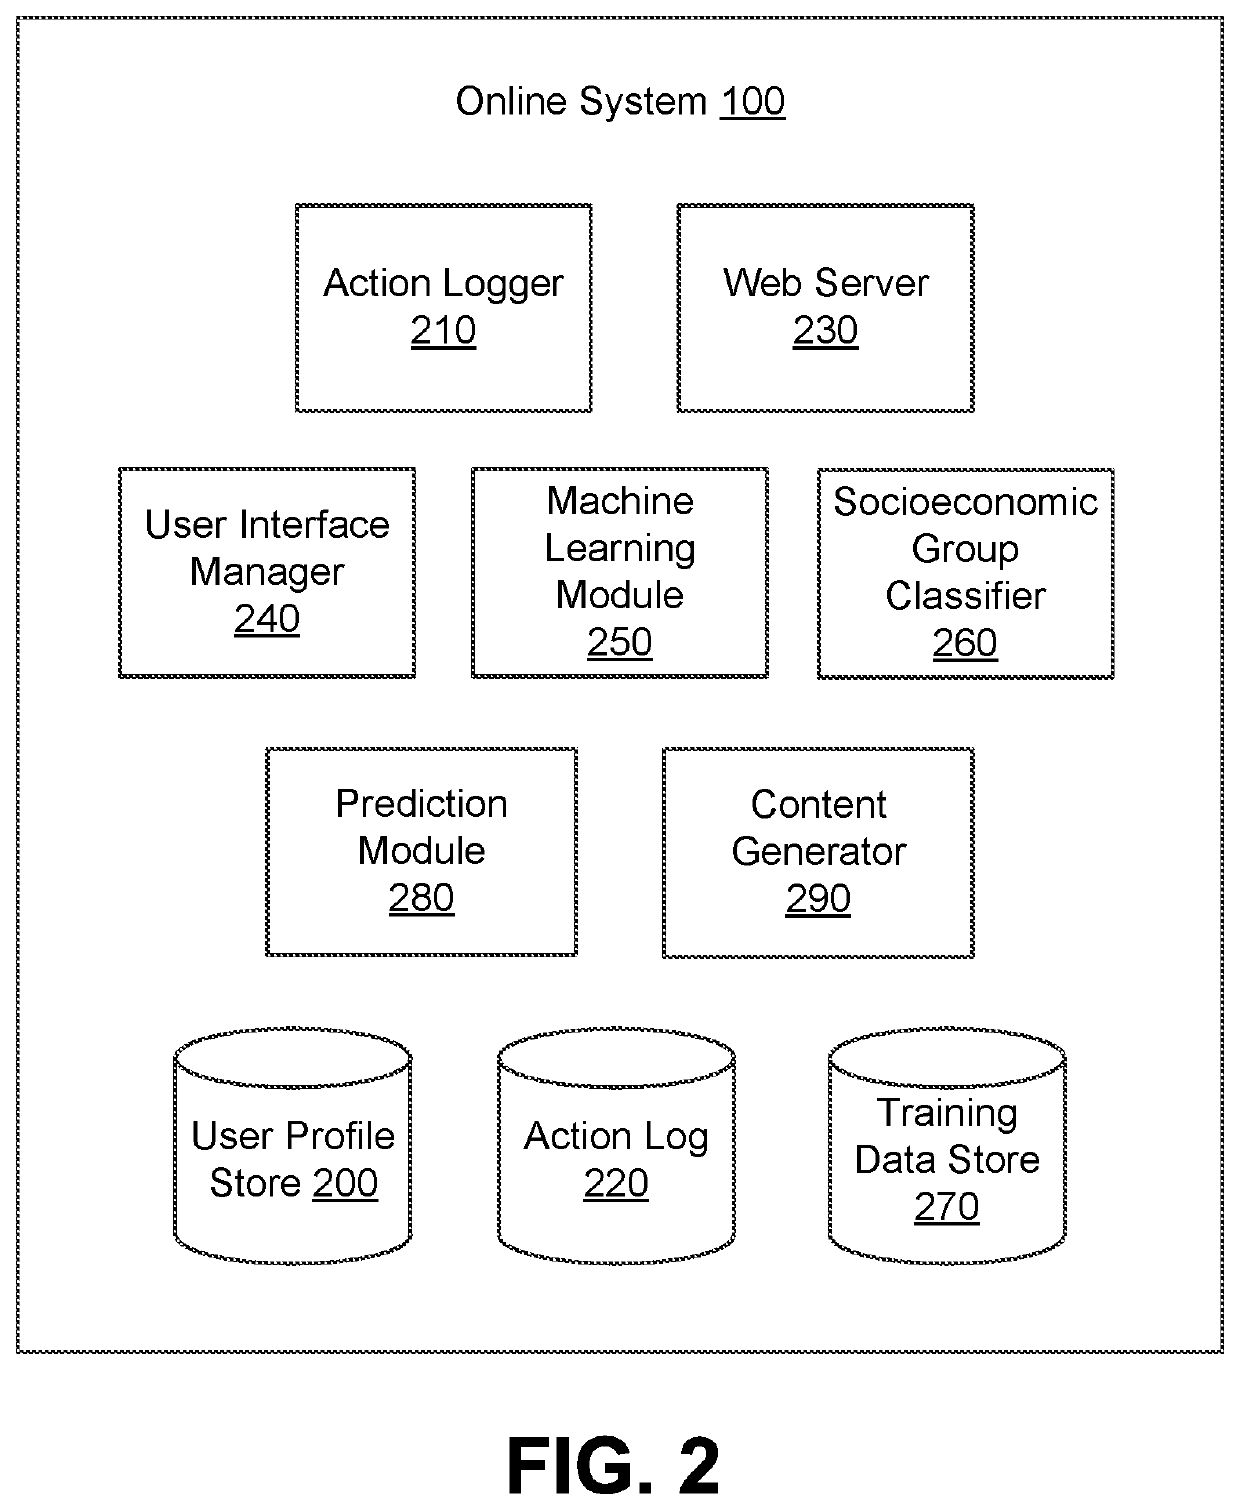 Socioeconomic group classification based on user features